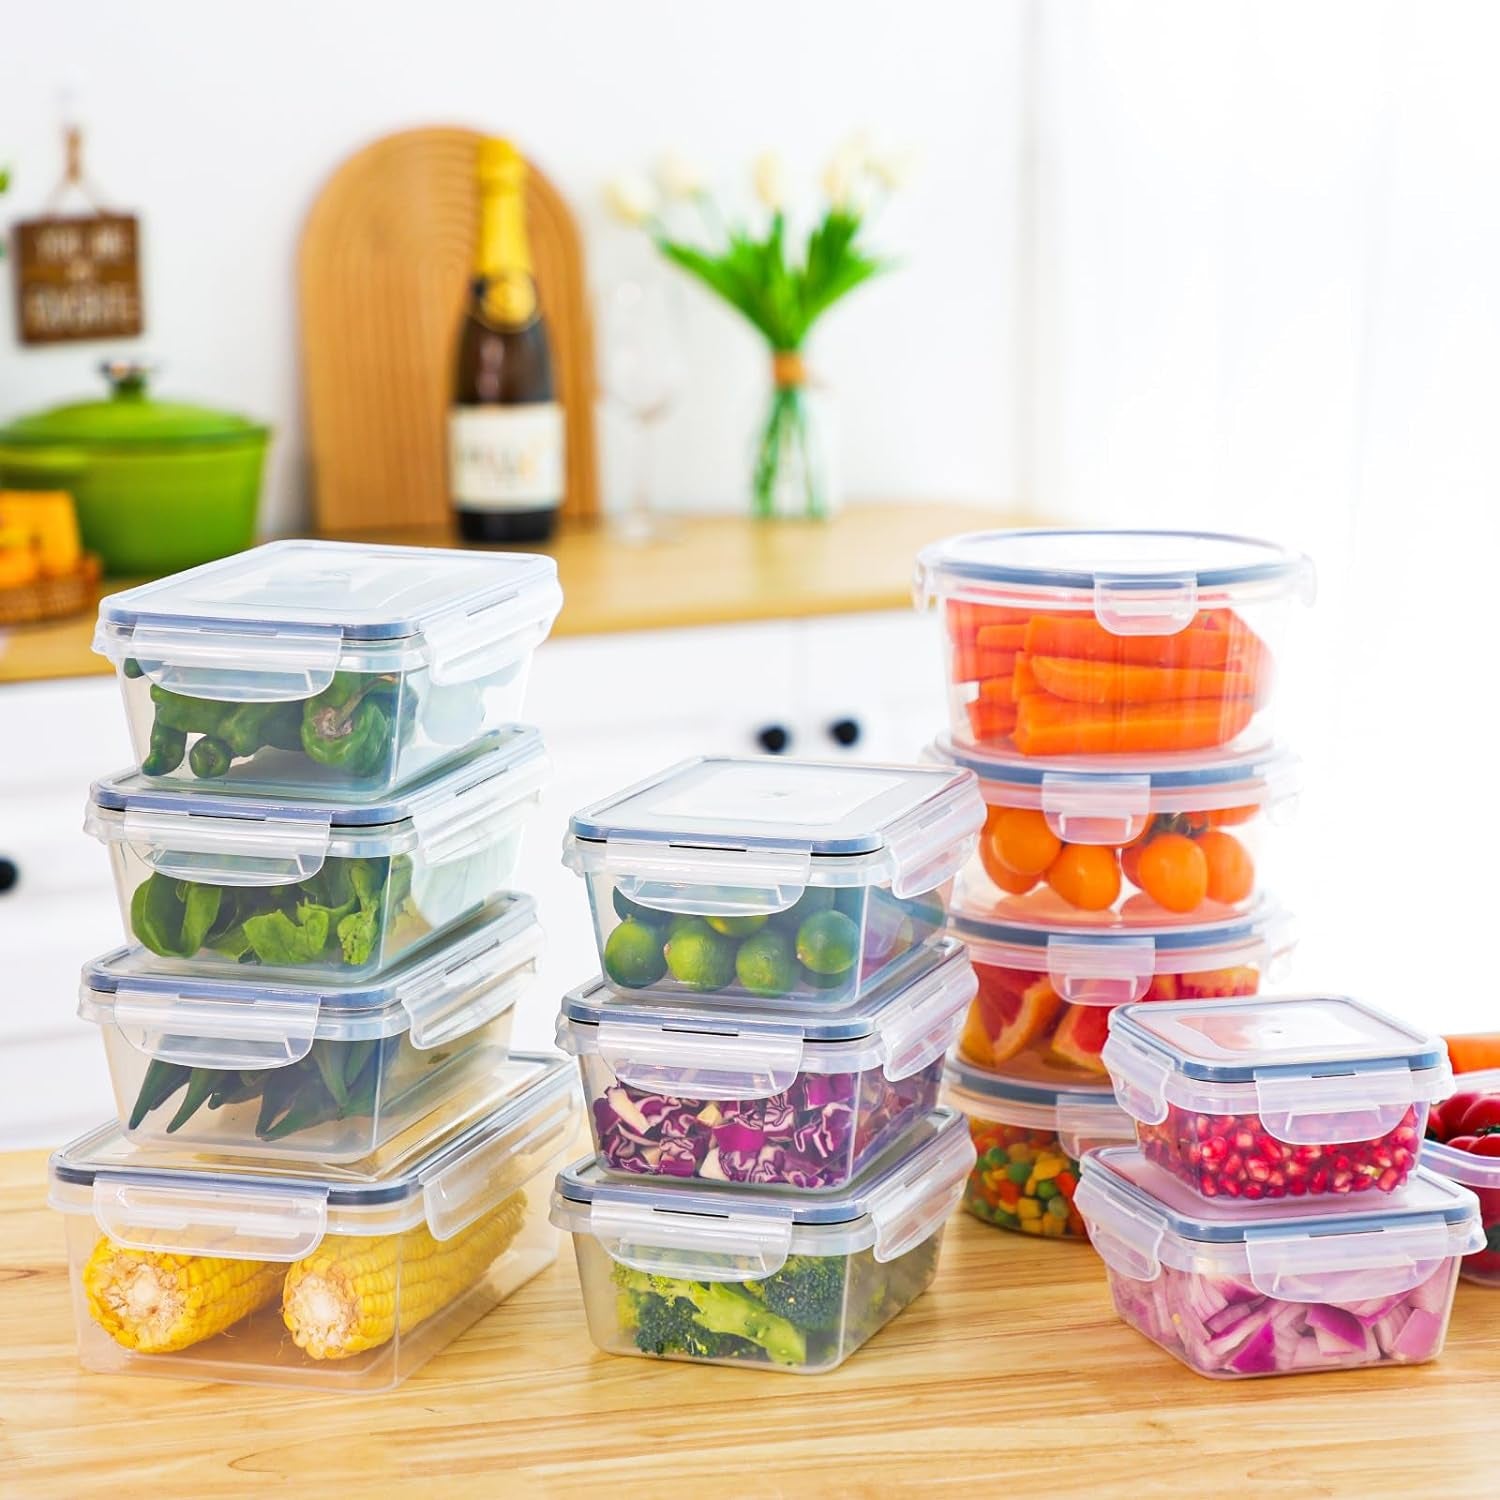 32pcs Airtight Food Storage Containers with lids